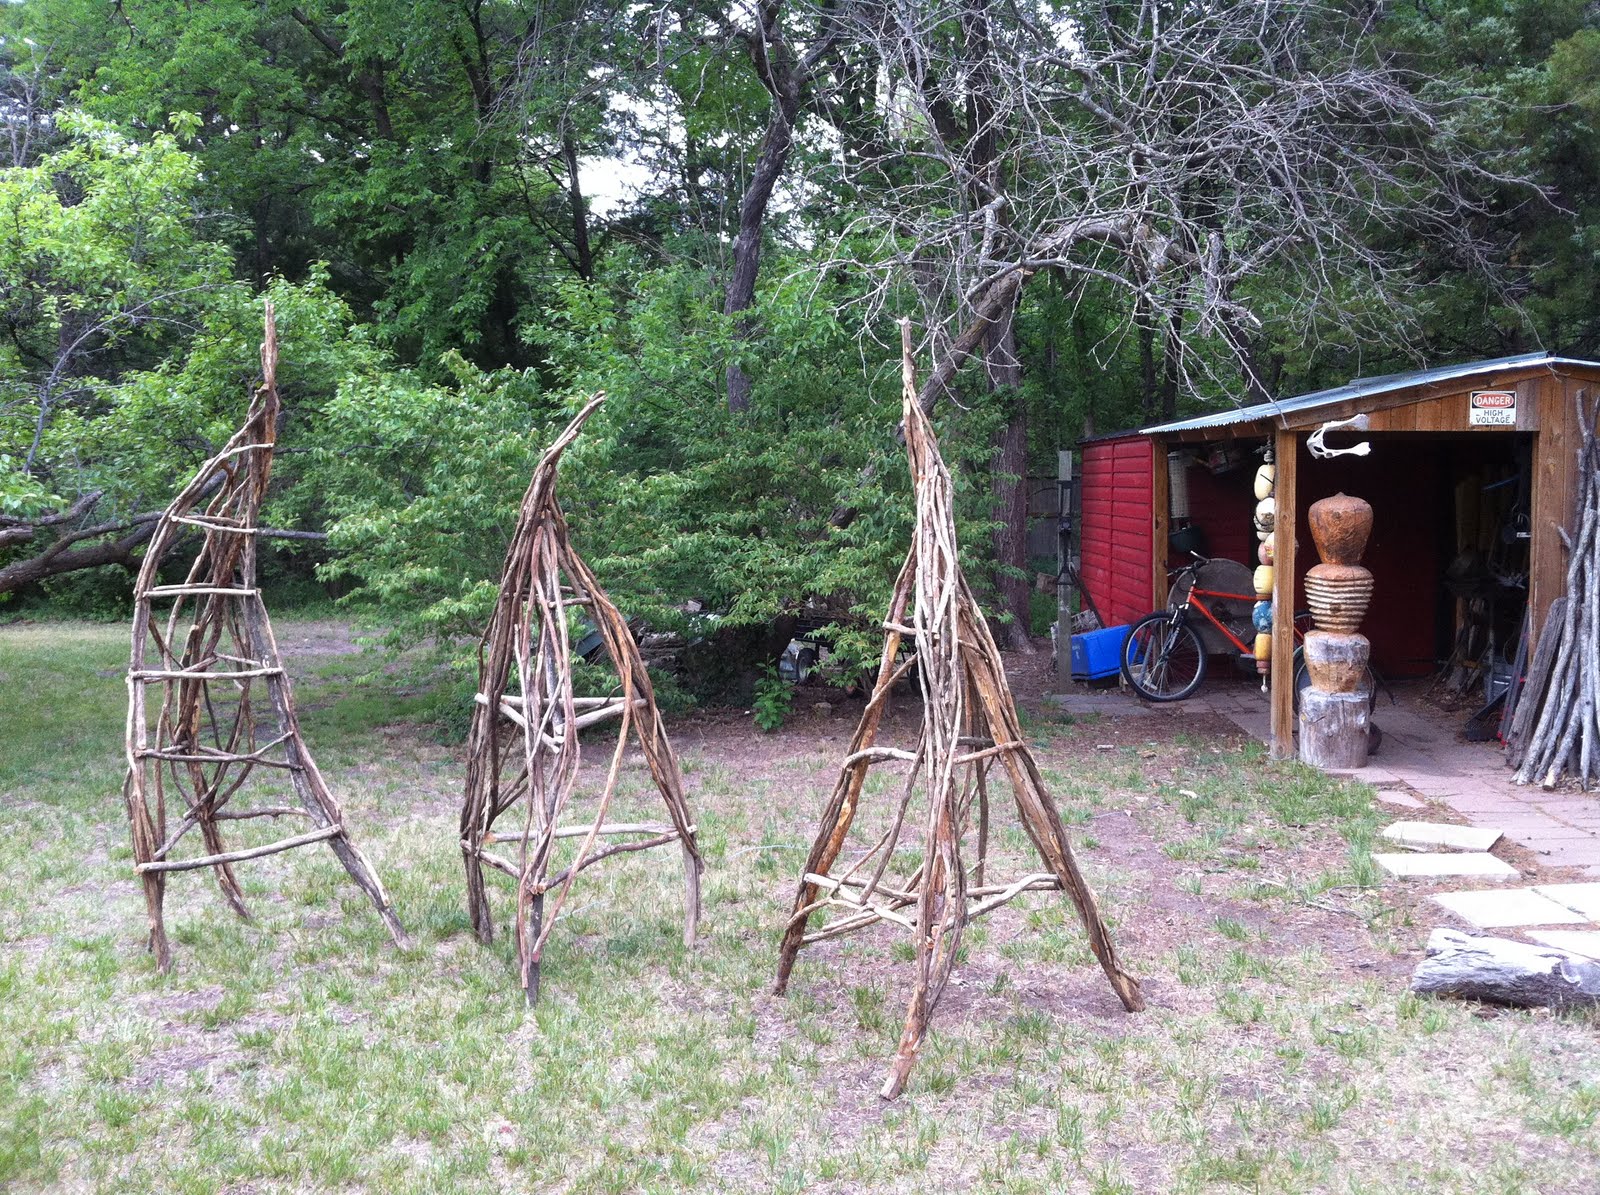 Dominic Shed: Build a shed using tree limbs